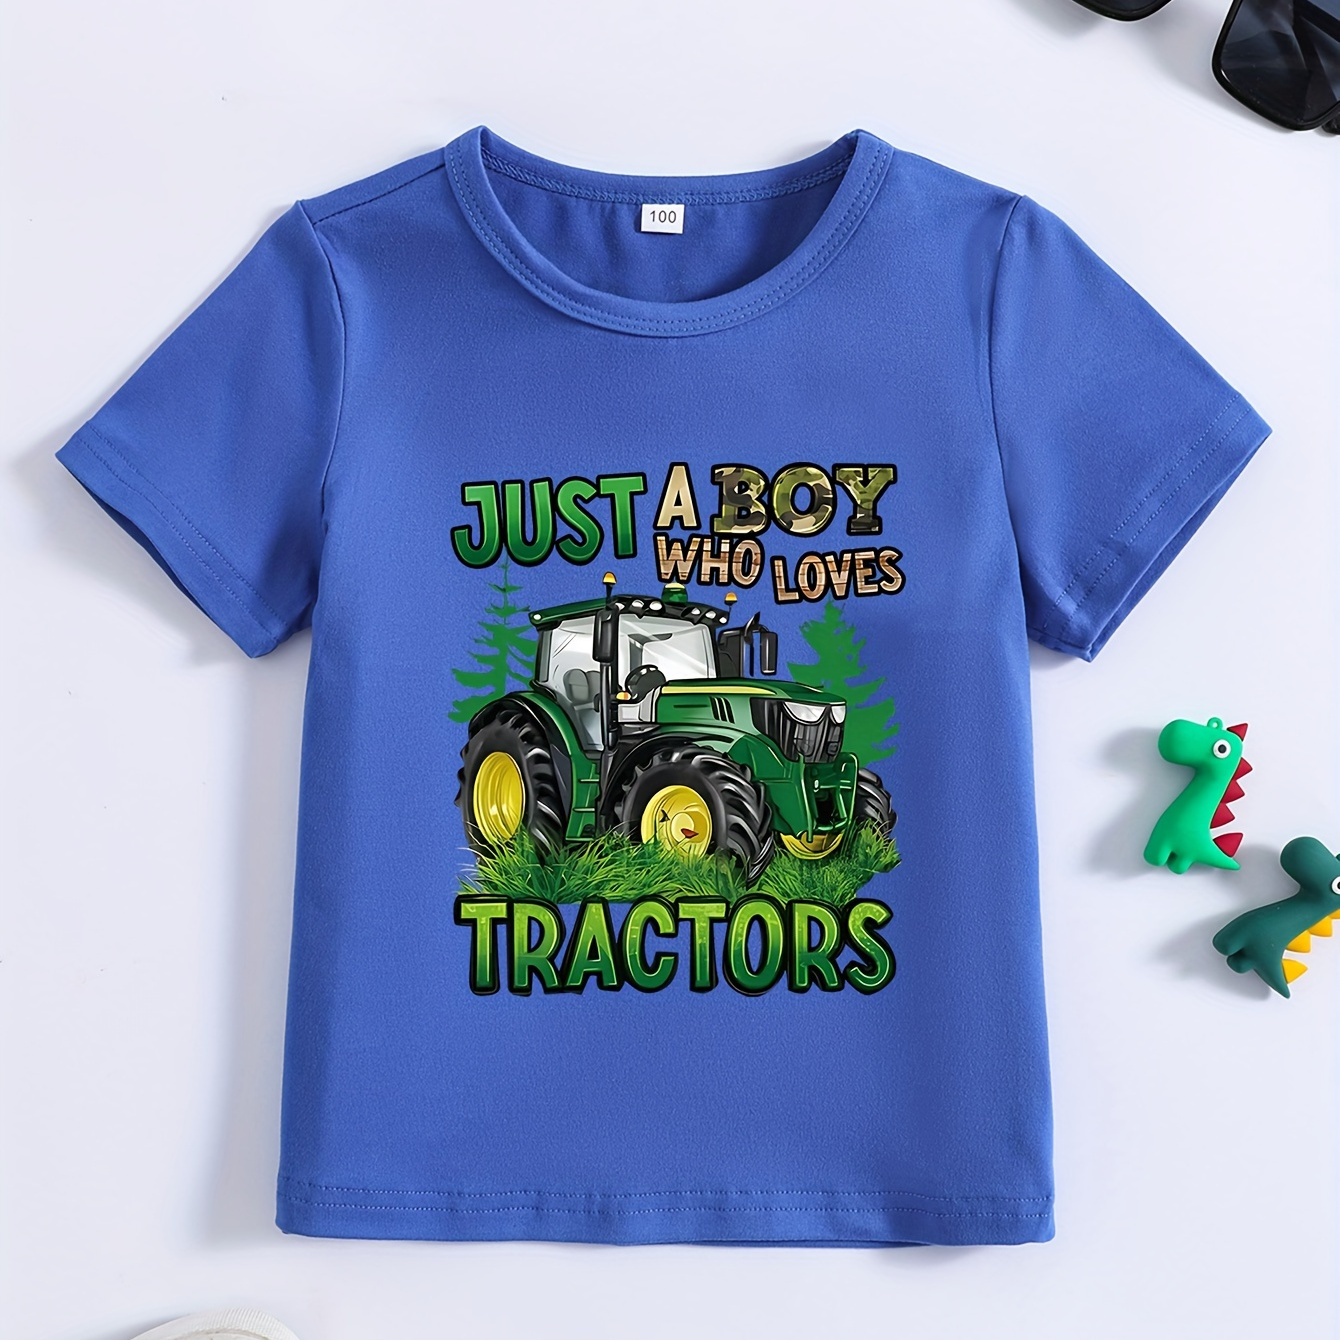 

Just A Boy Who Loves Tractors Print Boy's Crew Neck T-shirt, Short Sleeve Comfy Versatile Tee Tops, Summer Casual Clothing